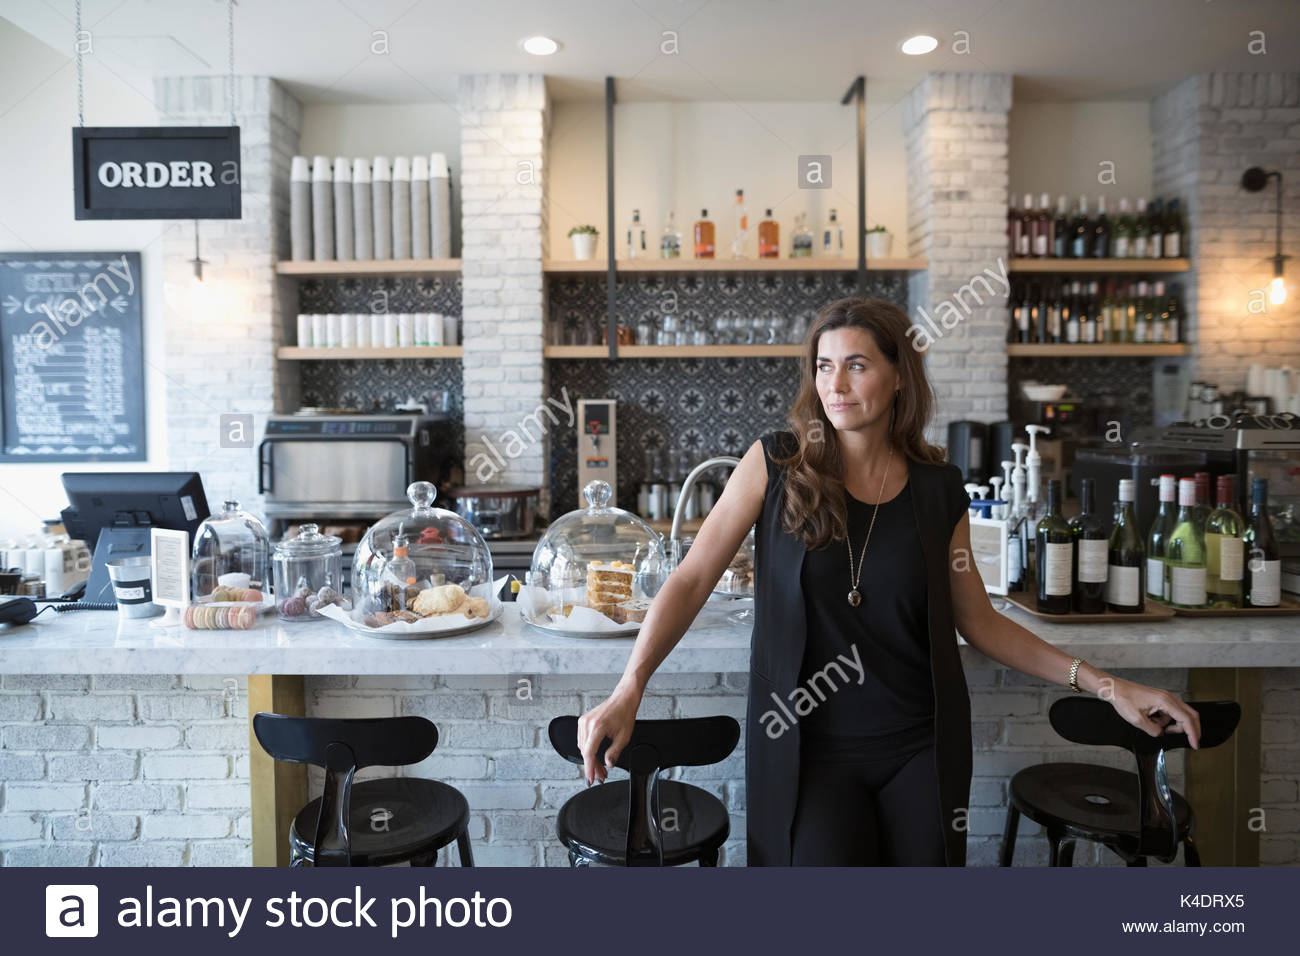 Pensive female cafe owner looking away Stock Photo